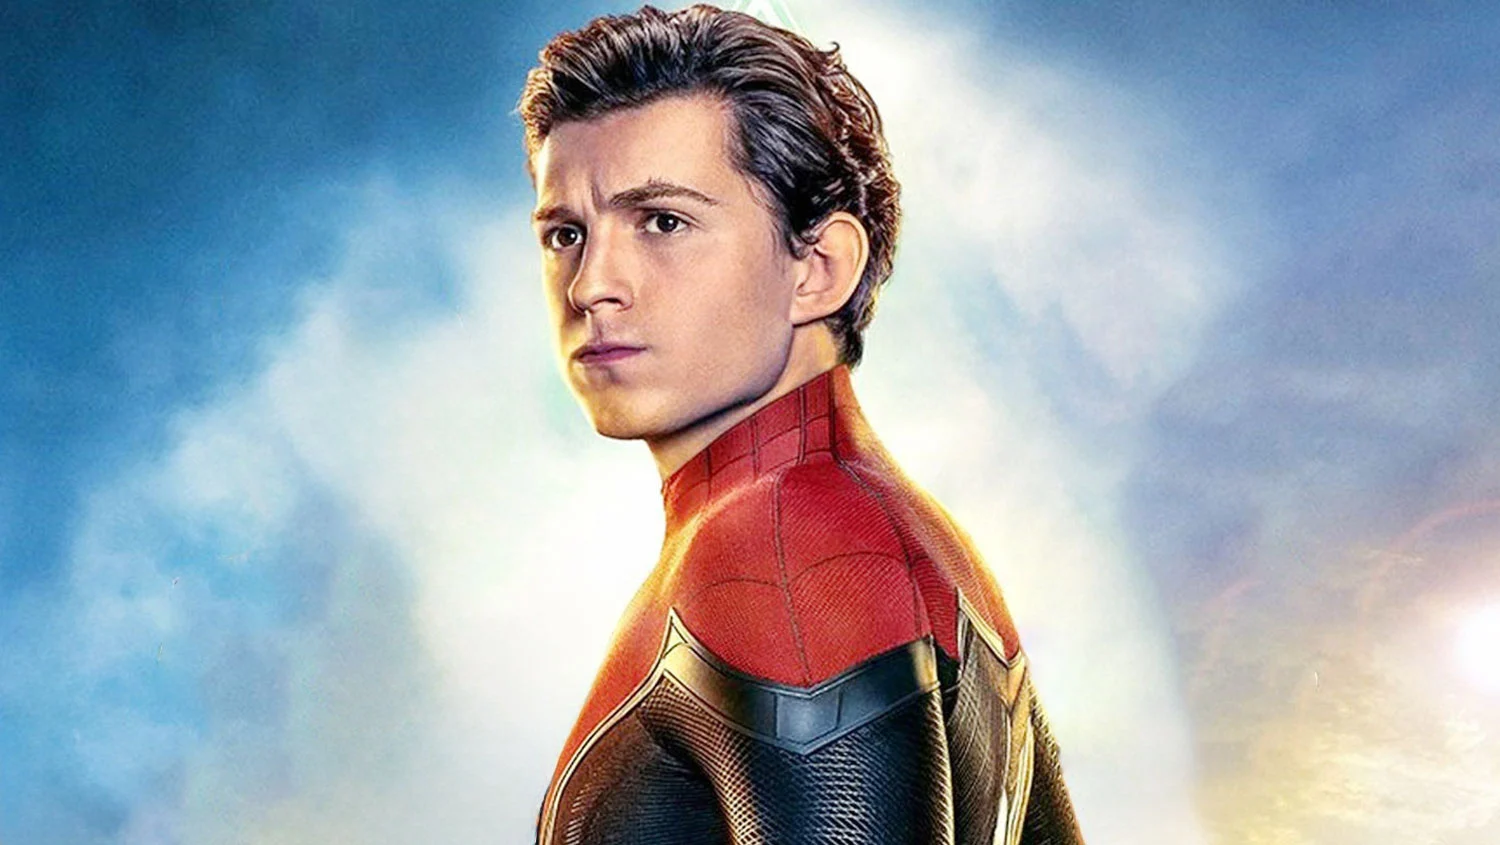 Tom Holland Says He'd 'Be a Fool' Not to Make Another 'Spider-Man